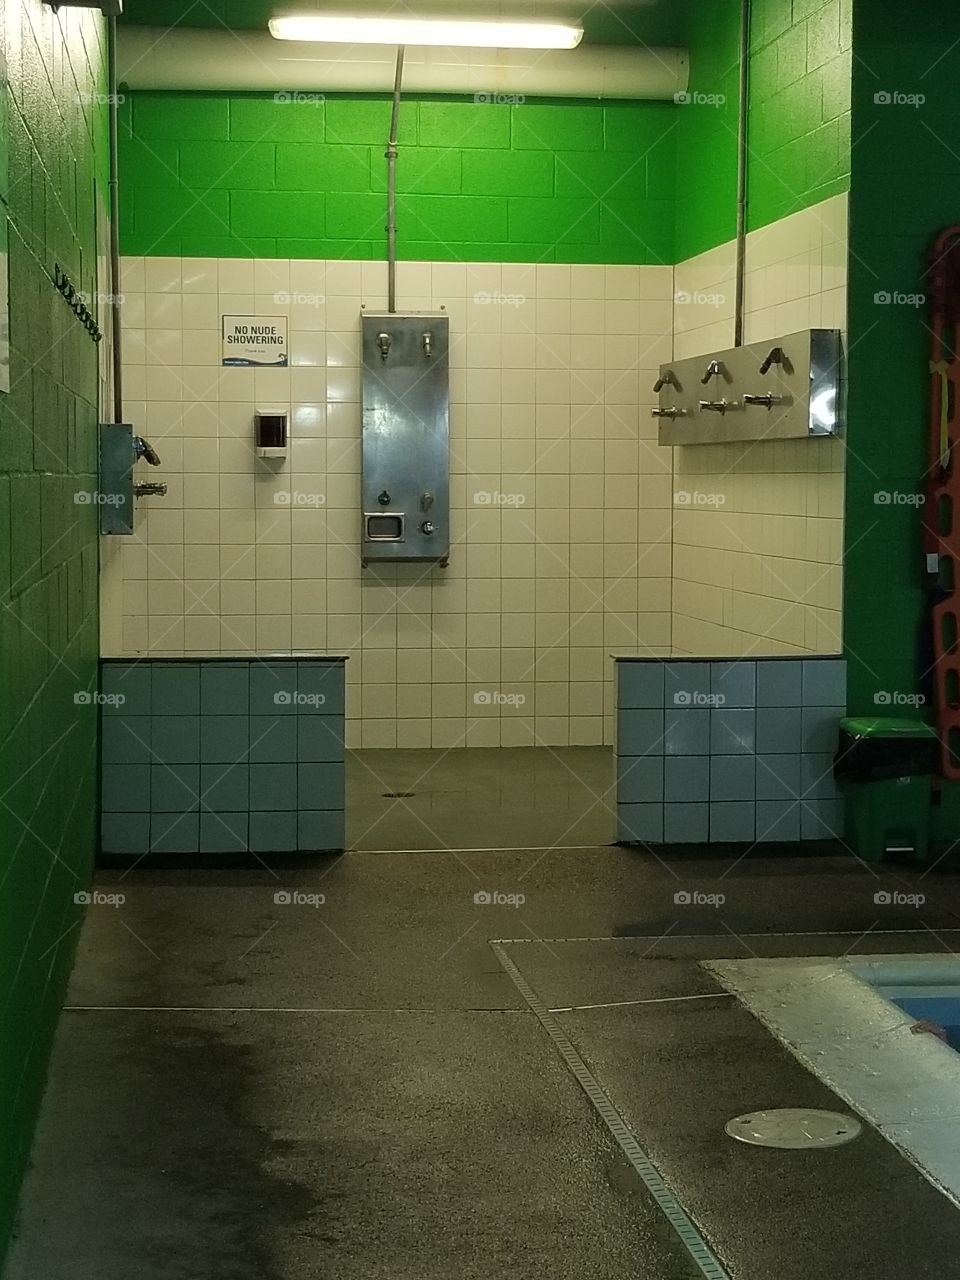 swimming pool shower with no nude showering notice